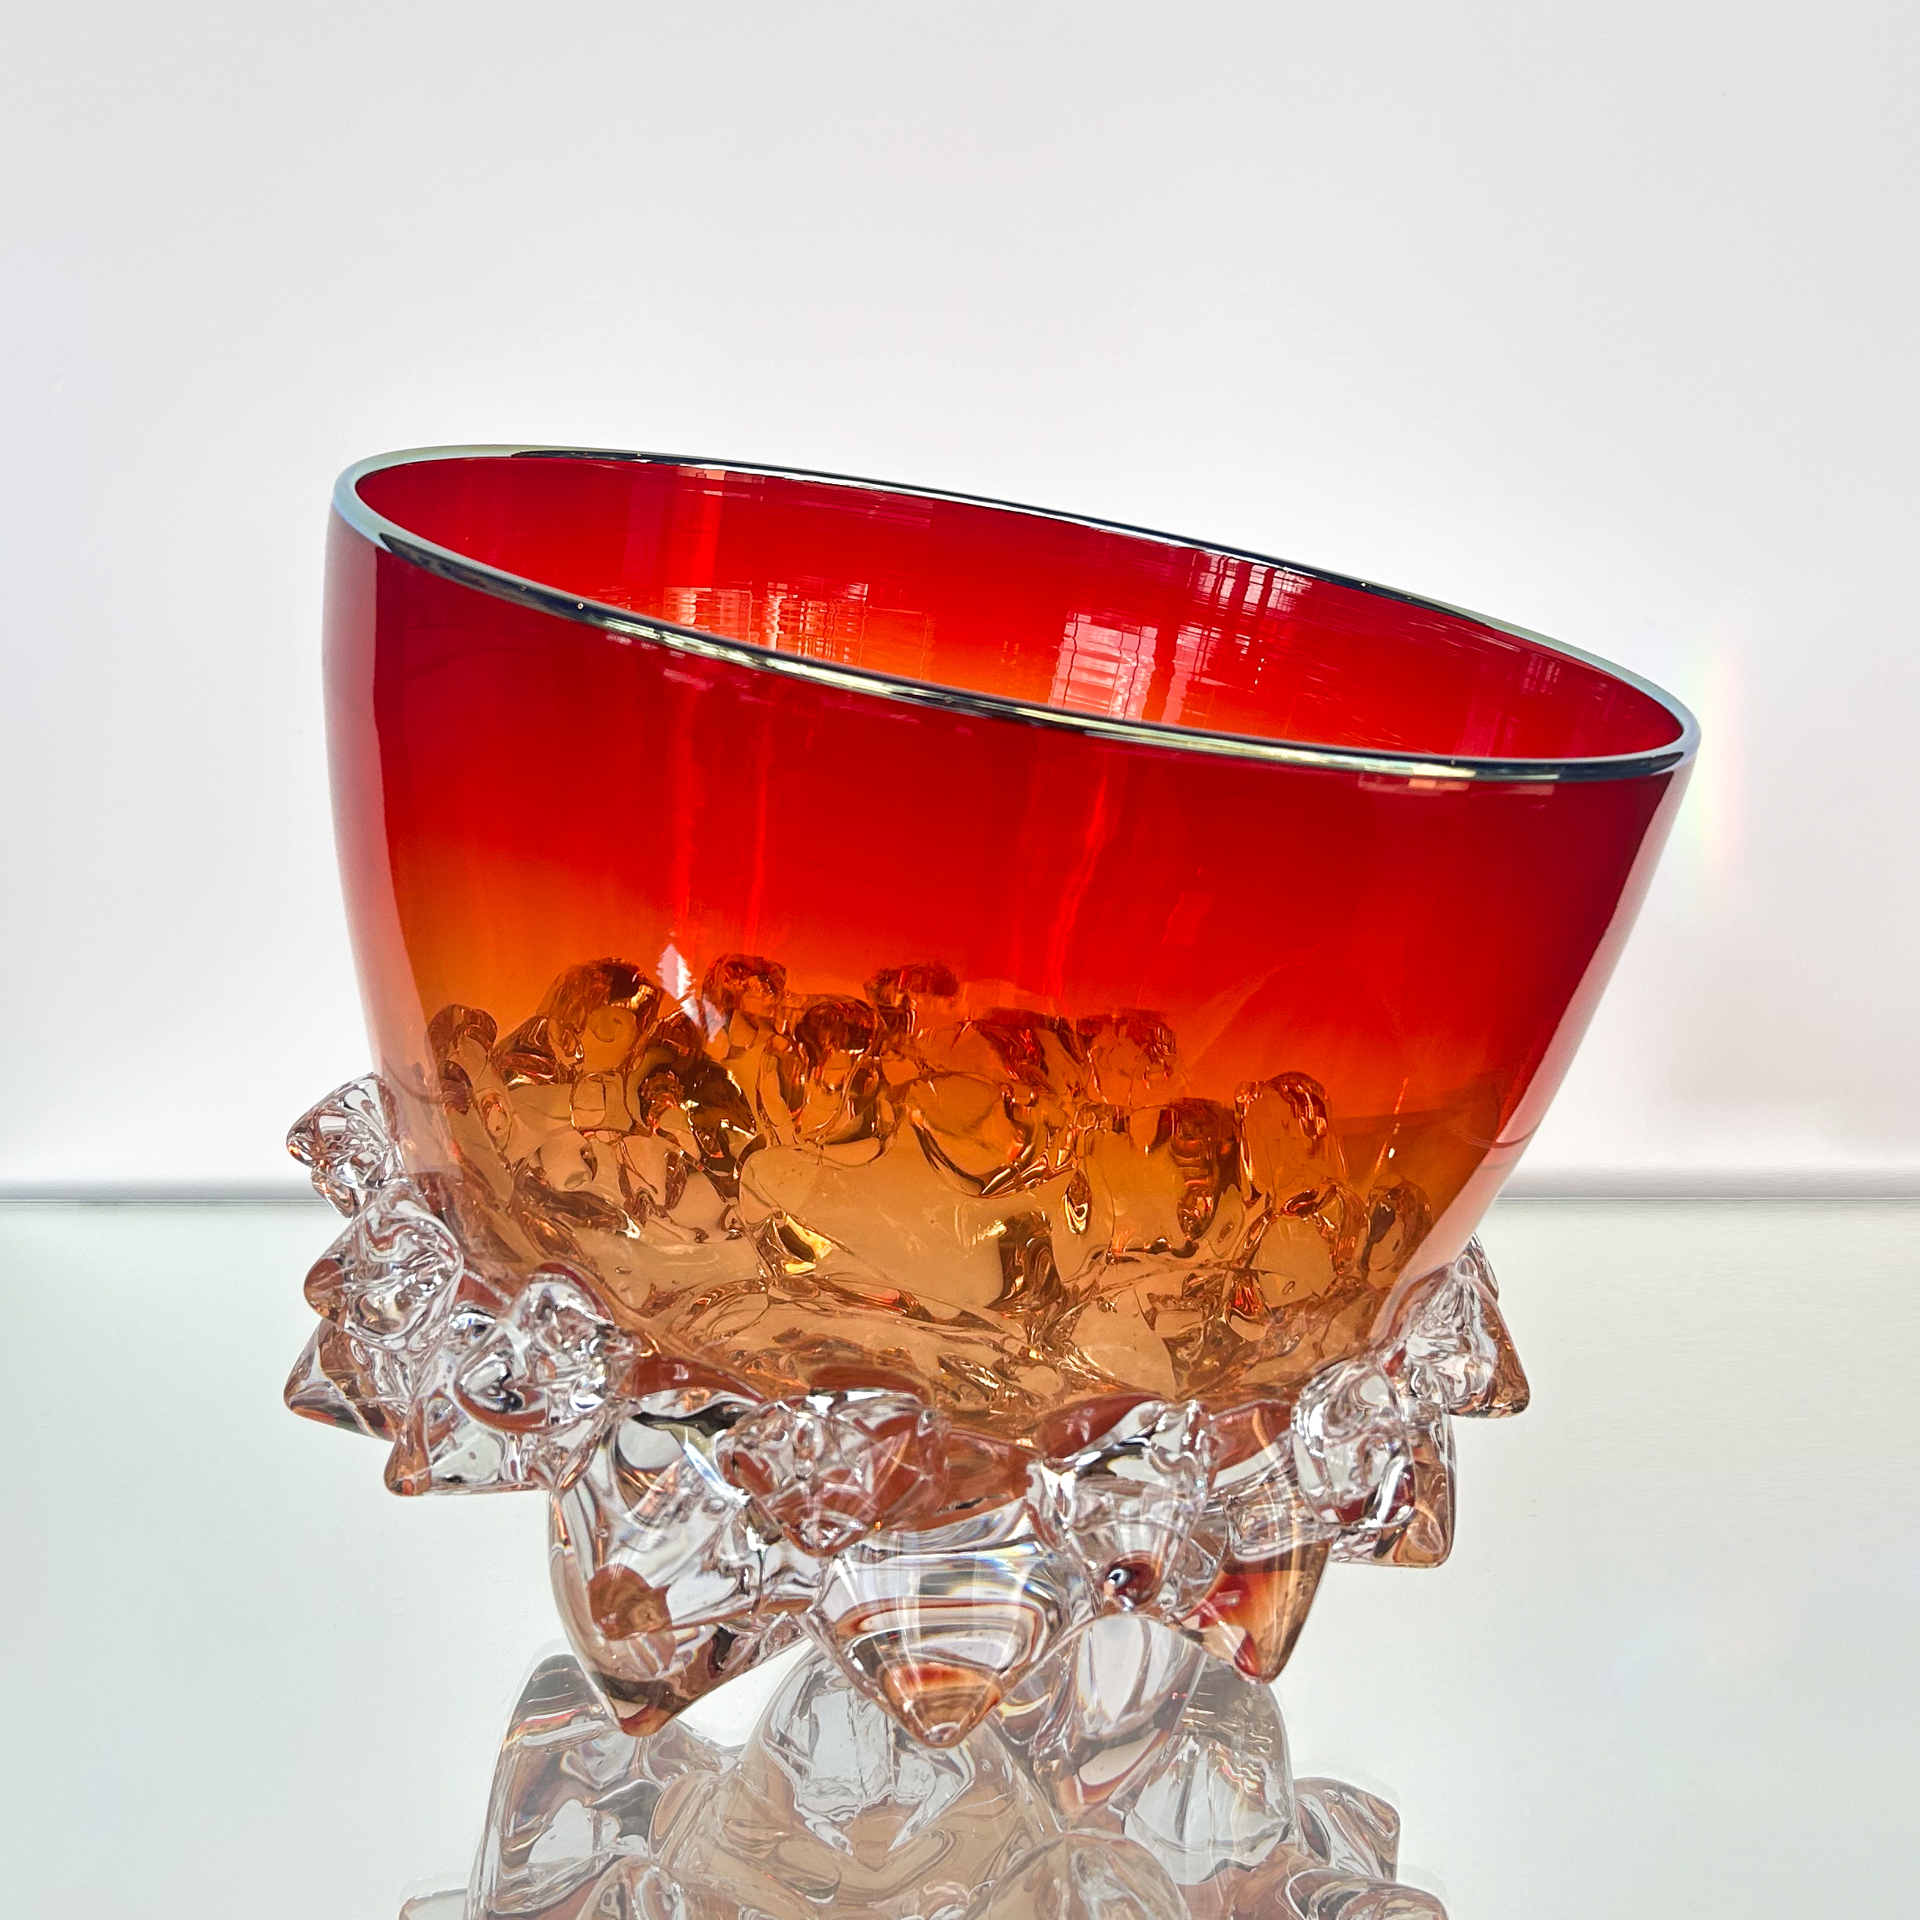 Cherry Red Thorn Vessel by Andrew Madvin